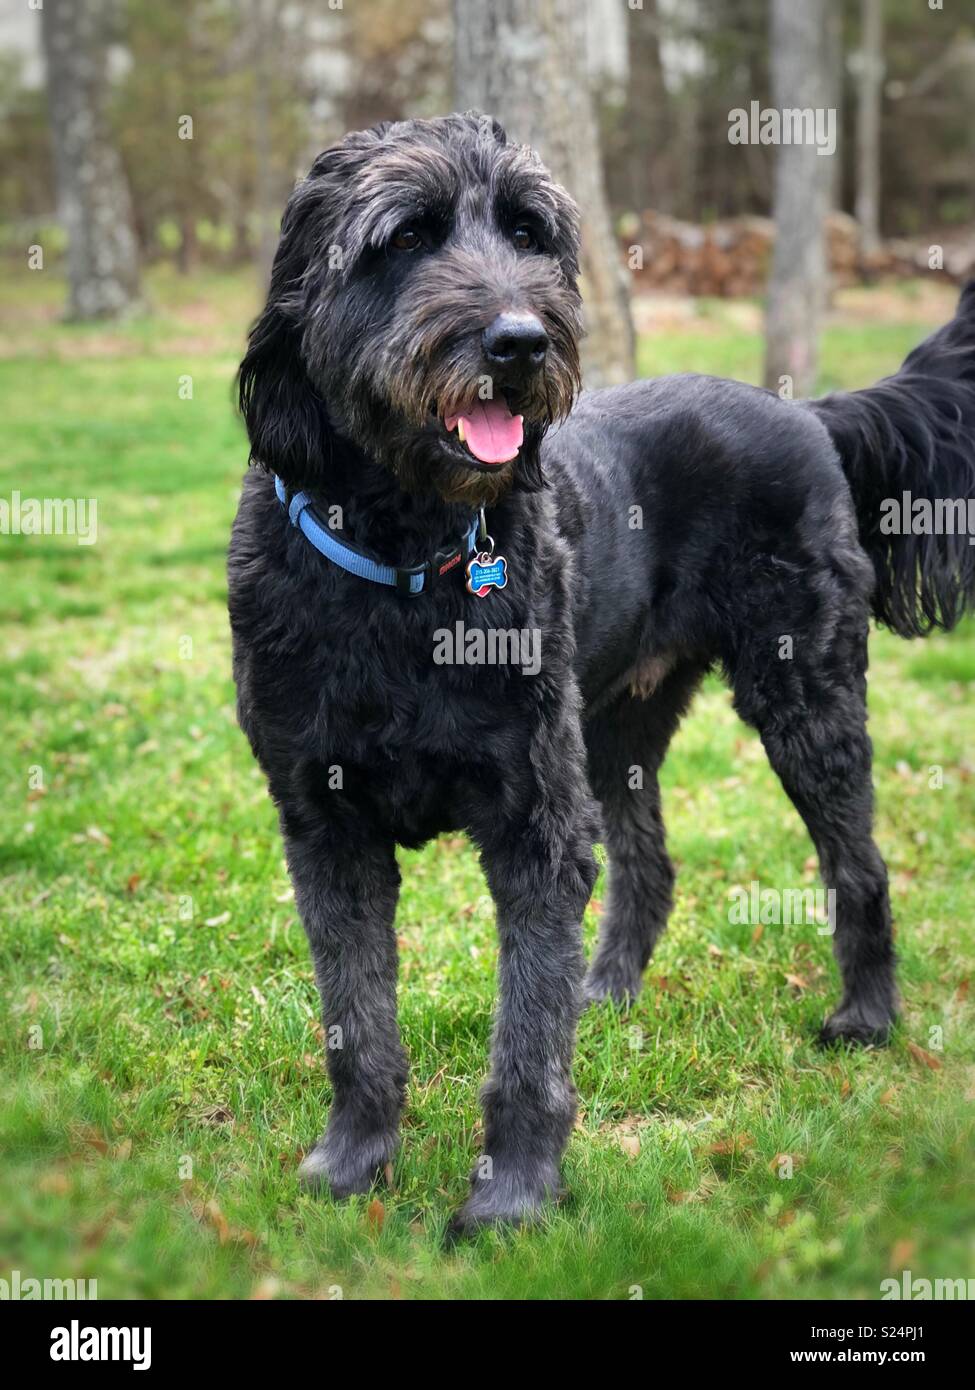 Black Australian Shepard Standard Poodle Mix adult male standing, cute, medium thick hair, looking calm, in grassy field with trees Stock Photo - Alamy